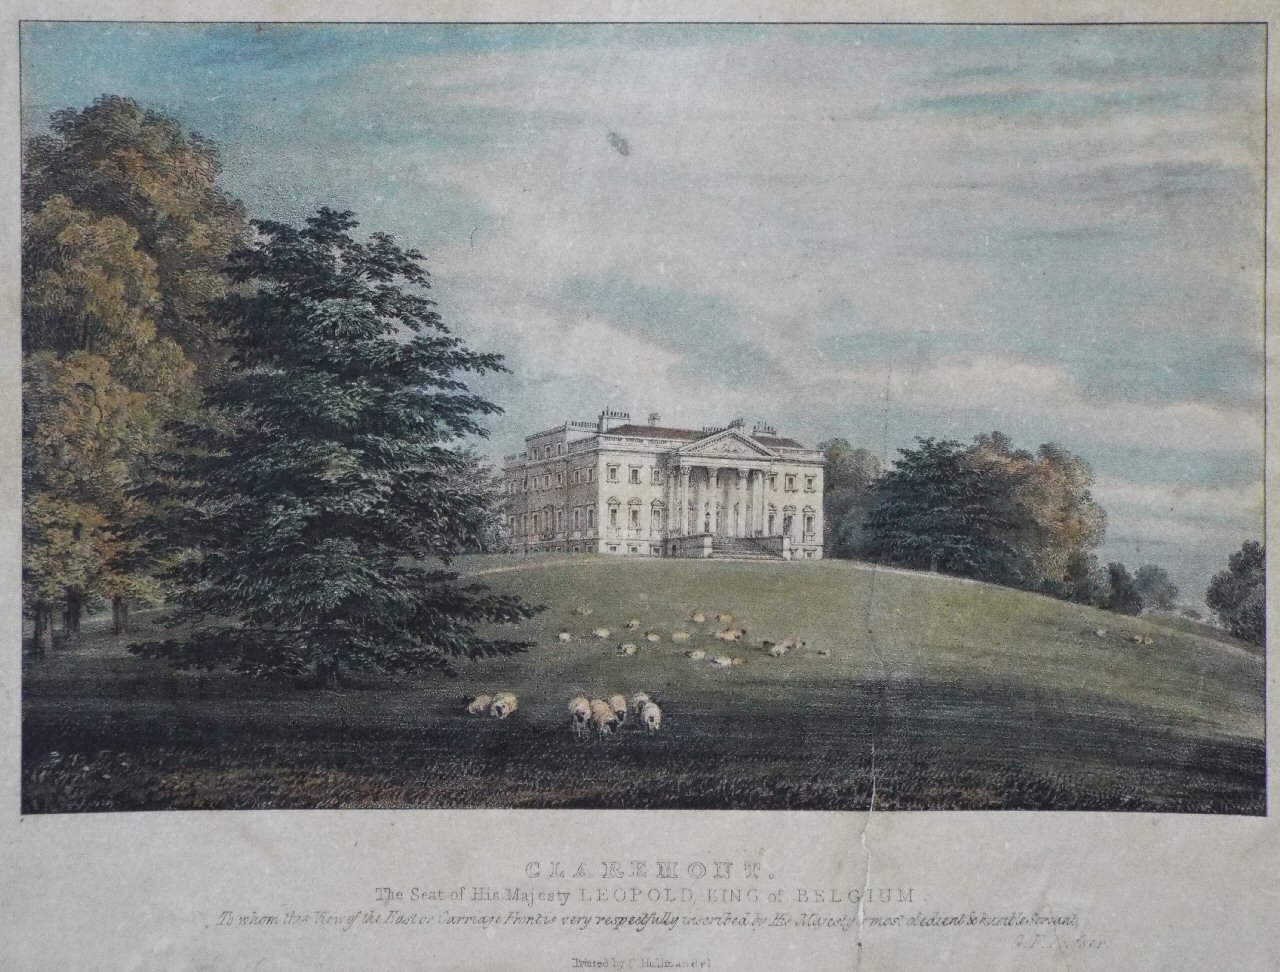 Lithograph - Claremont. The Seat of His Majesty Leopold King of Belgium. To whom this View of the East or Carriage Front, is very respectfully inscribed by His Majesty's most obedient & humble Servant, G. F. Prosser. - Prosser